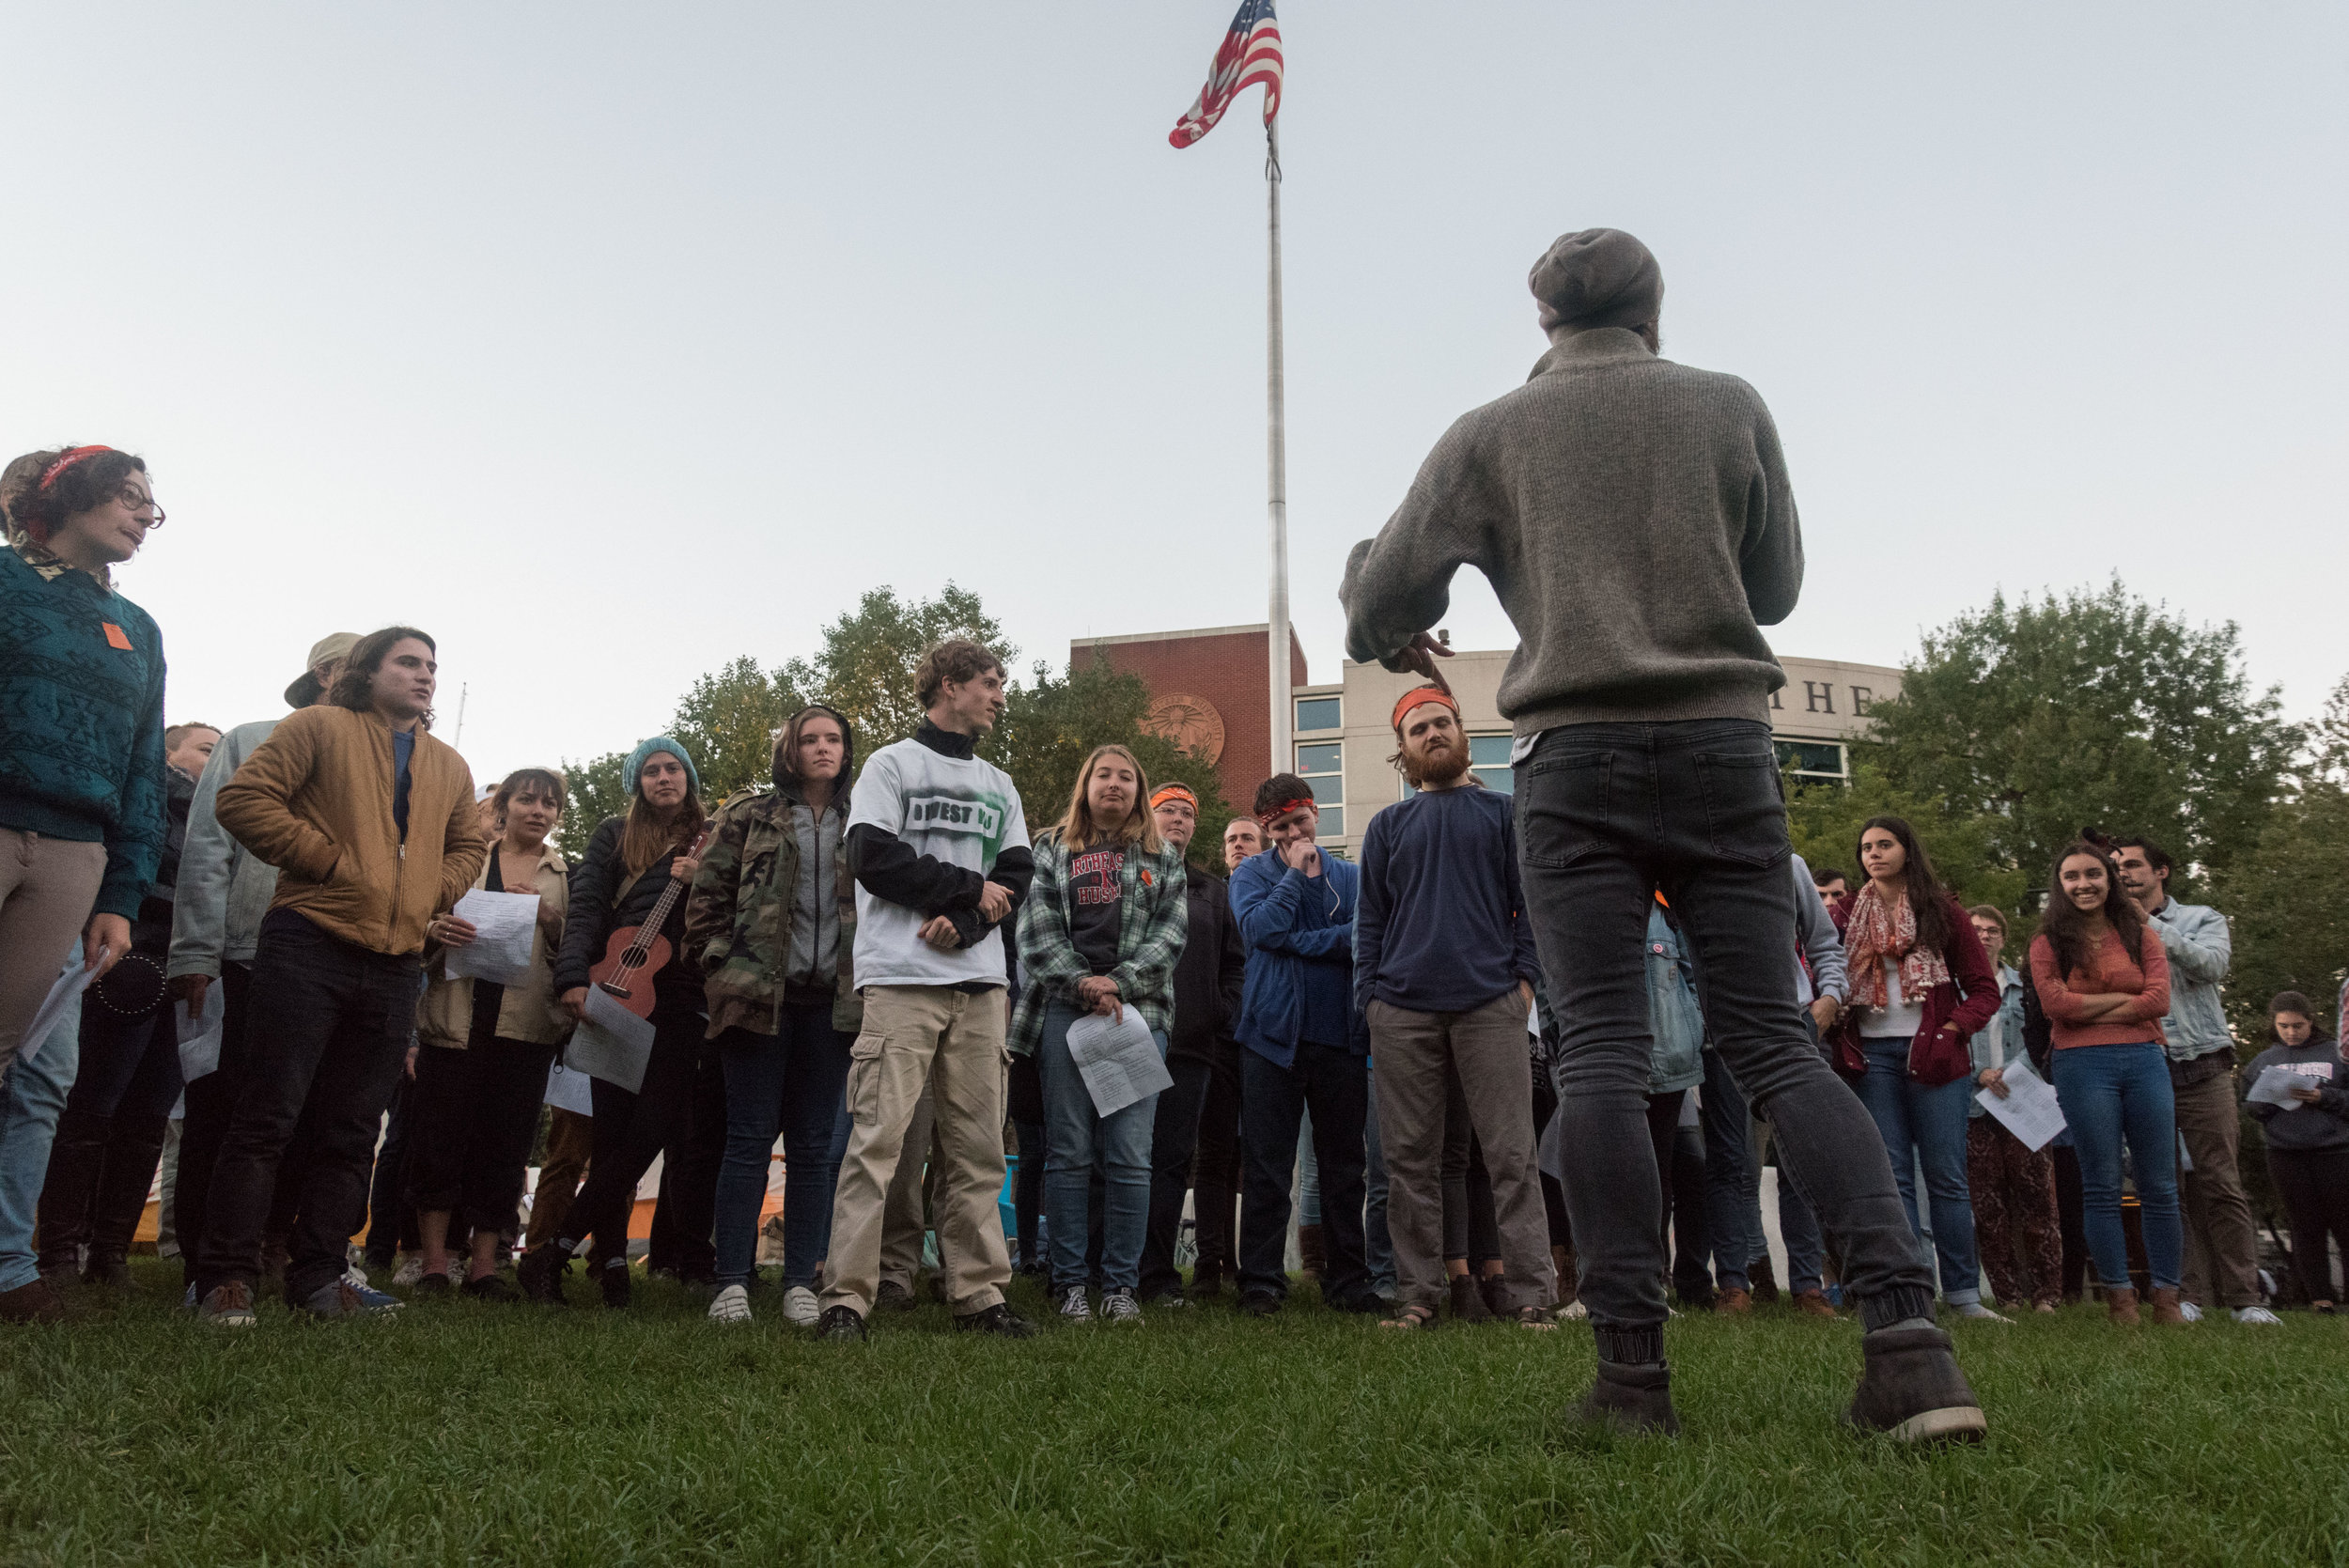  DivestNU co-founder and senior Austin Williams speaks to the crowd during a rally on Centennial Common on Tuesday, Oct. 4, 2016. The rally consisted of various chants, as well as musical presentations from other members targeted at Northeastern's re